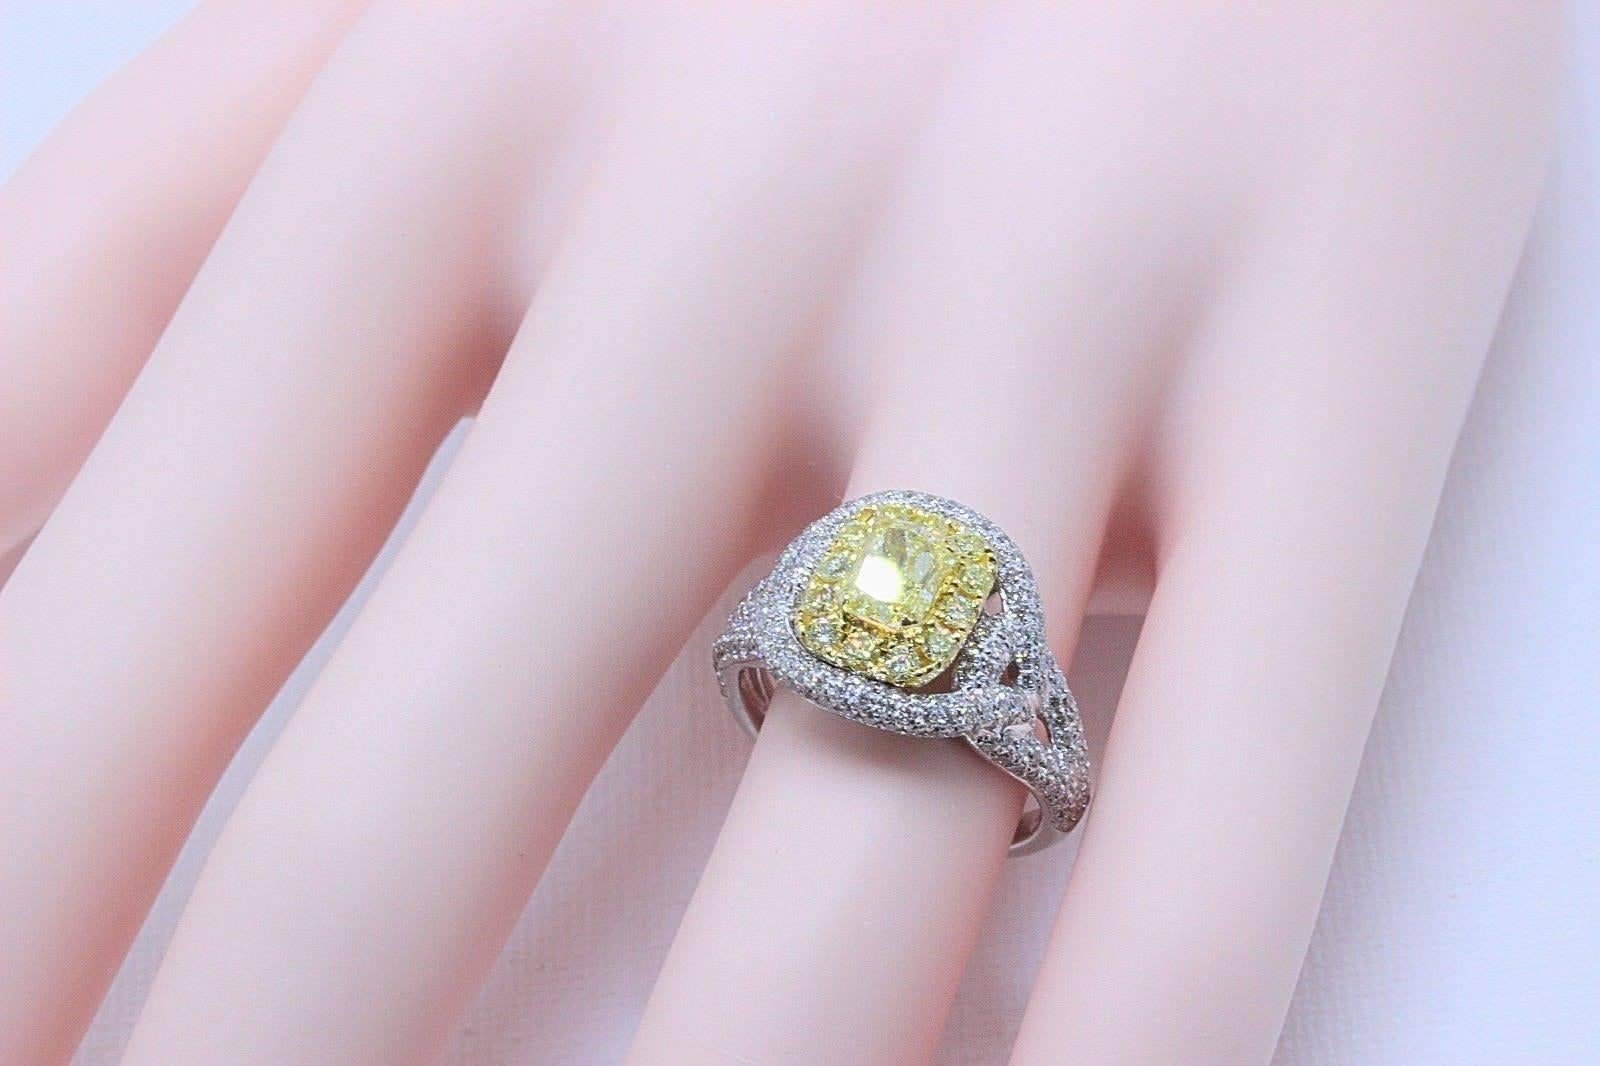 Fancy Intense Yellow Diamond Engagement Ring with Pave Diamond Accents
Certification:  GIA 2176961142
Metal:  Platinum PT950 & Yellow Gold 18KT
Size:  7.5 - Sizable
Total Carat Weight:  2.33 TCW
Center Diamond Shape:  Radiant ( Round-Cornered